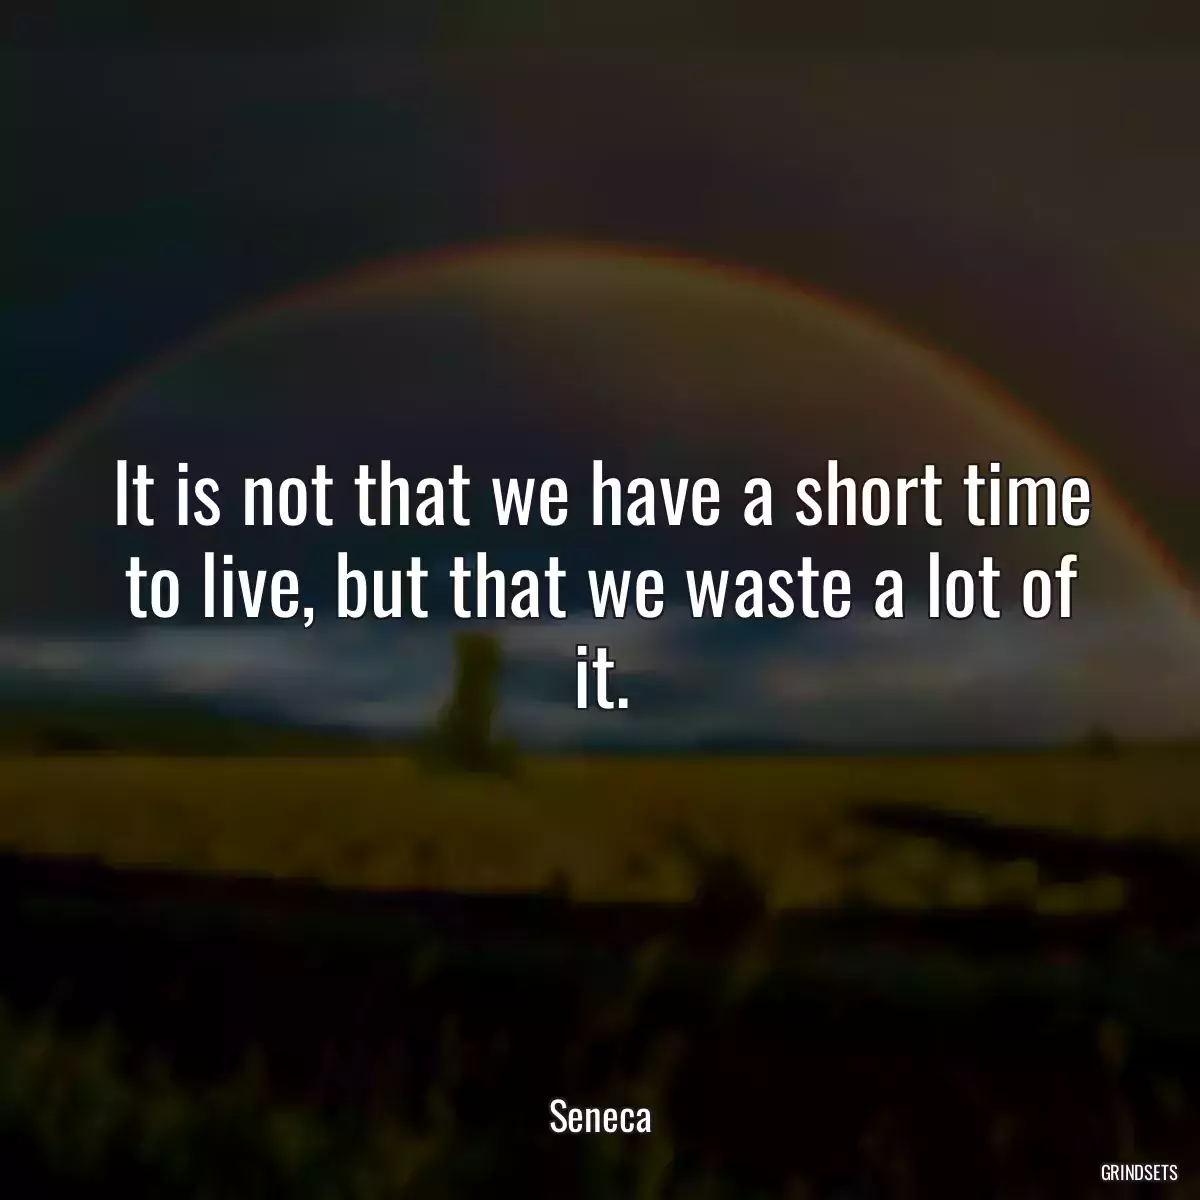 It is not that we have a short time to live, but that we waste a lot of it.